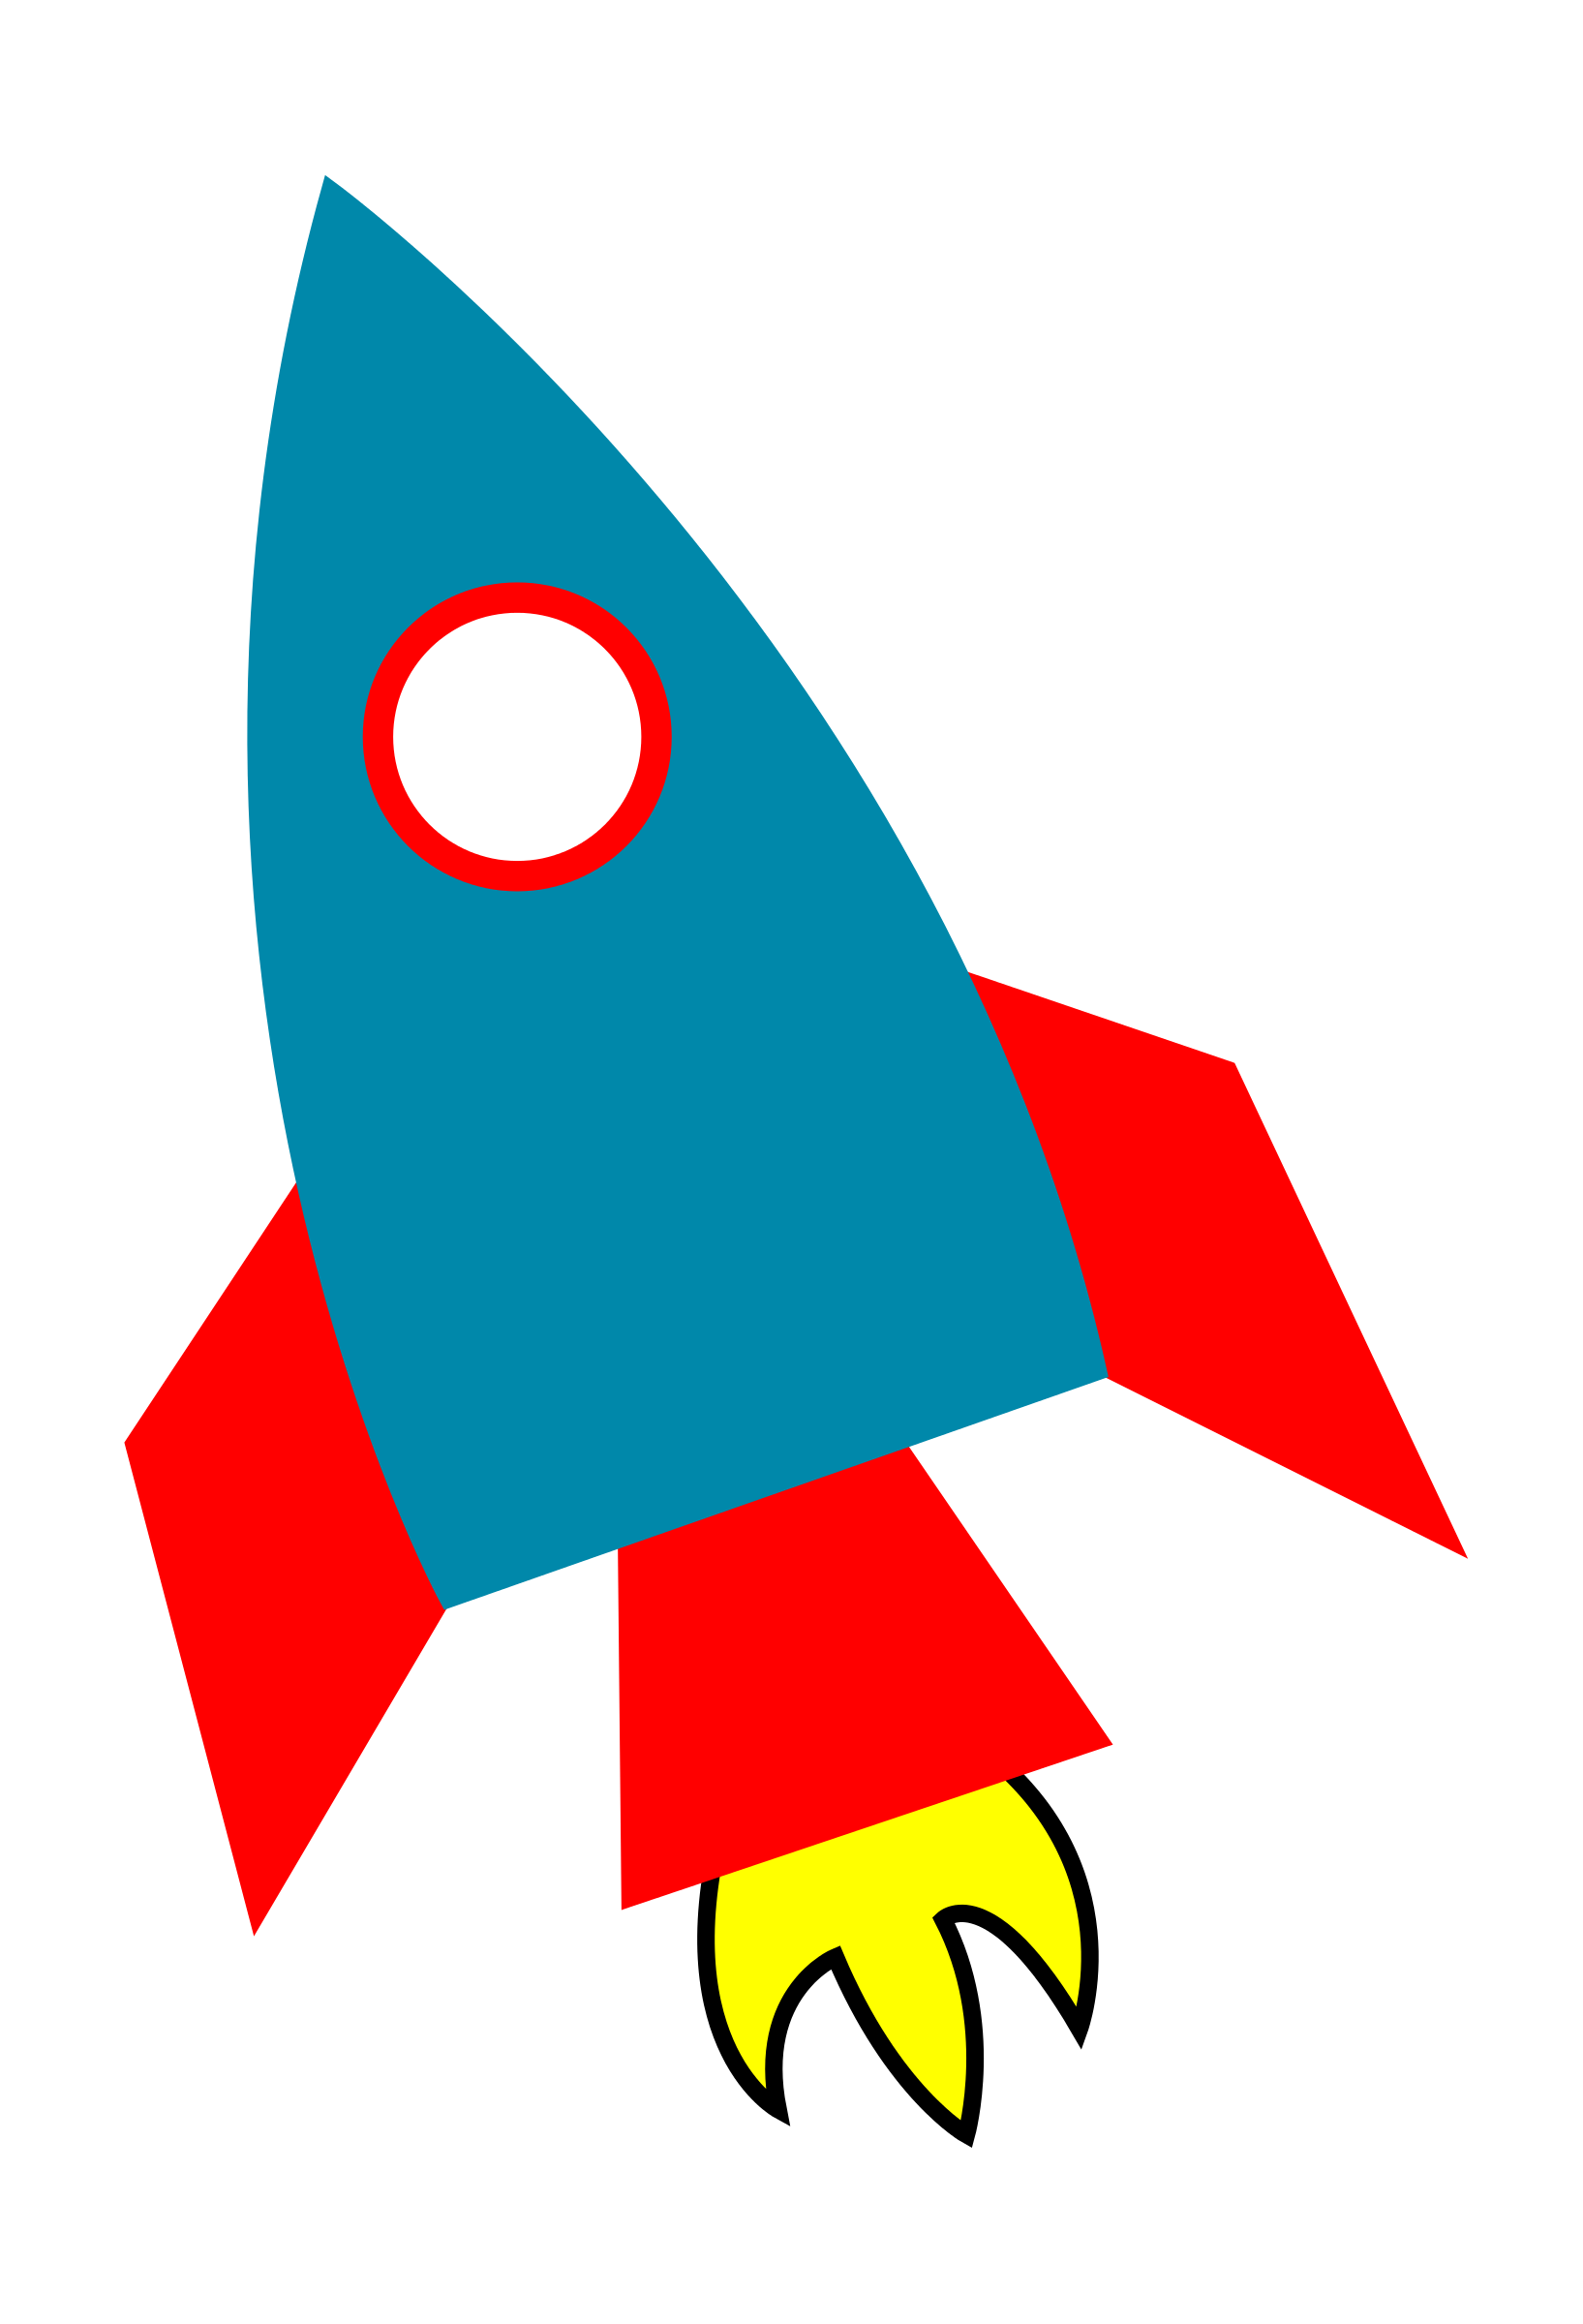 space age clipart - photo #29